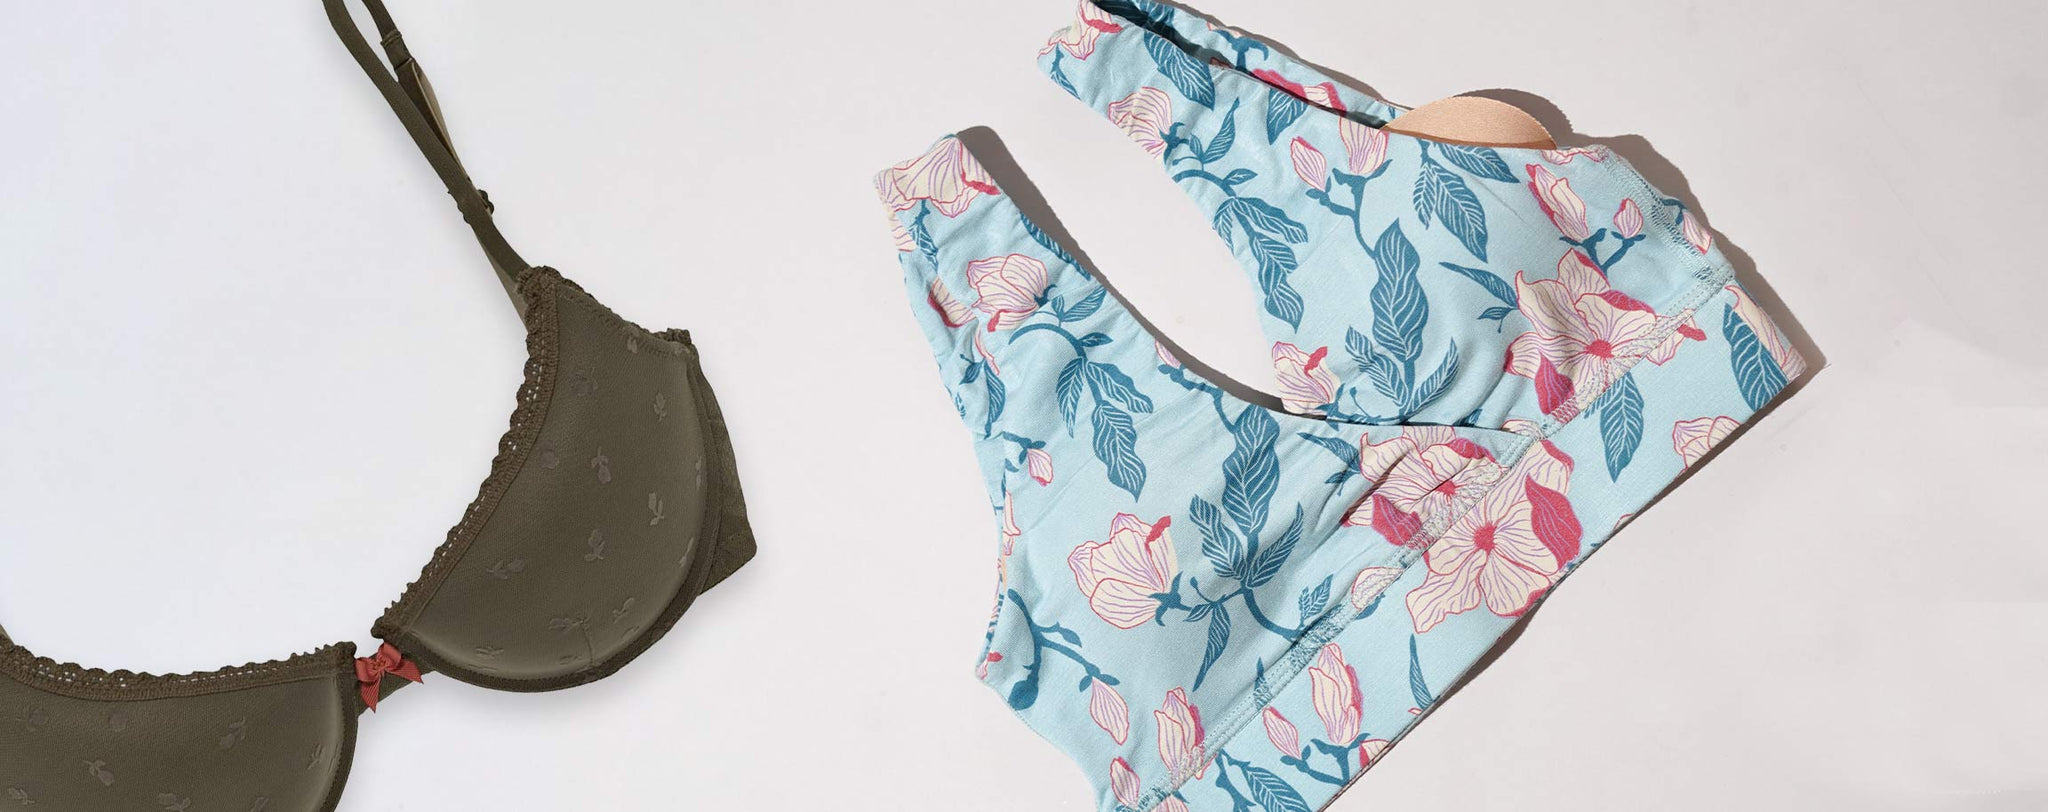 Padded Bra vs. Removable Pad Bra: Which One is For You?